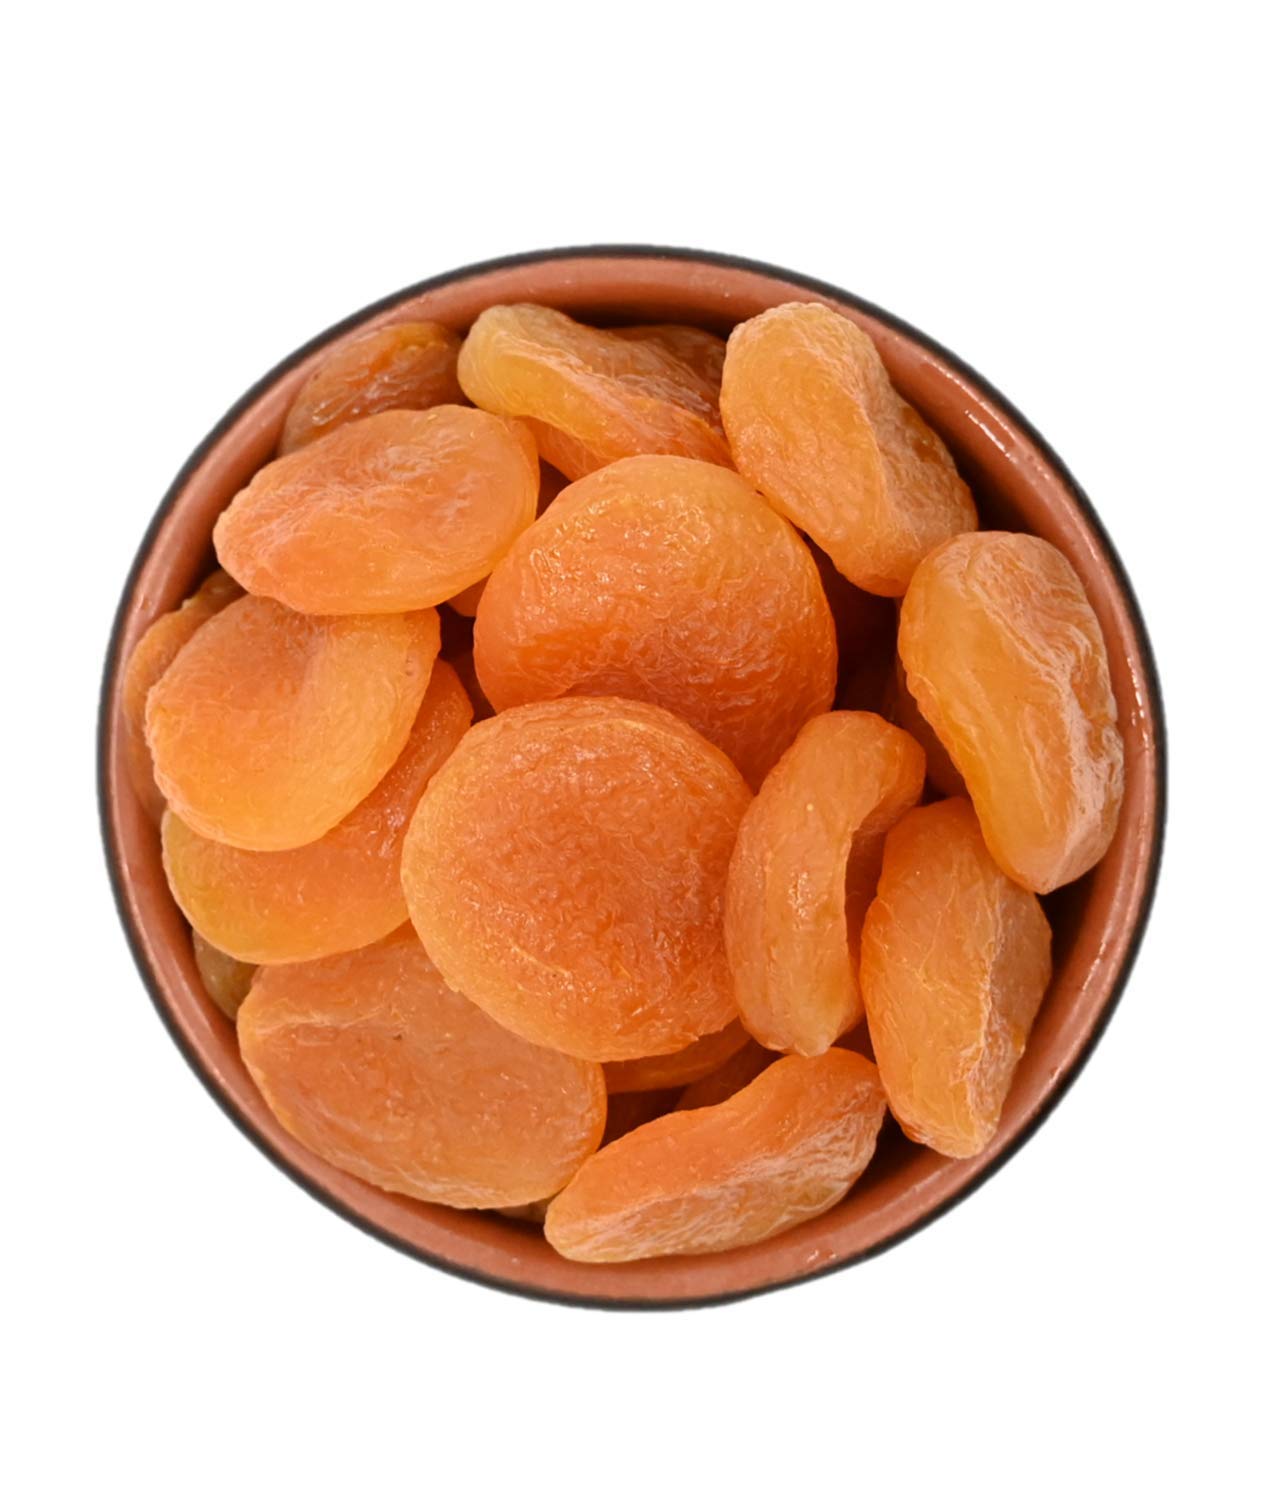 No.4 Extra Choice Dried Apricots, Turkish Apricots, SIZE #4 (5 LB